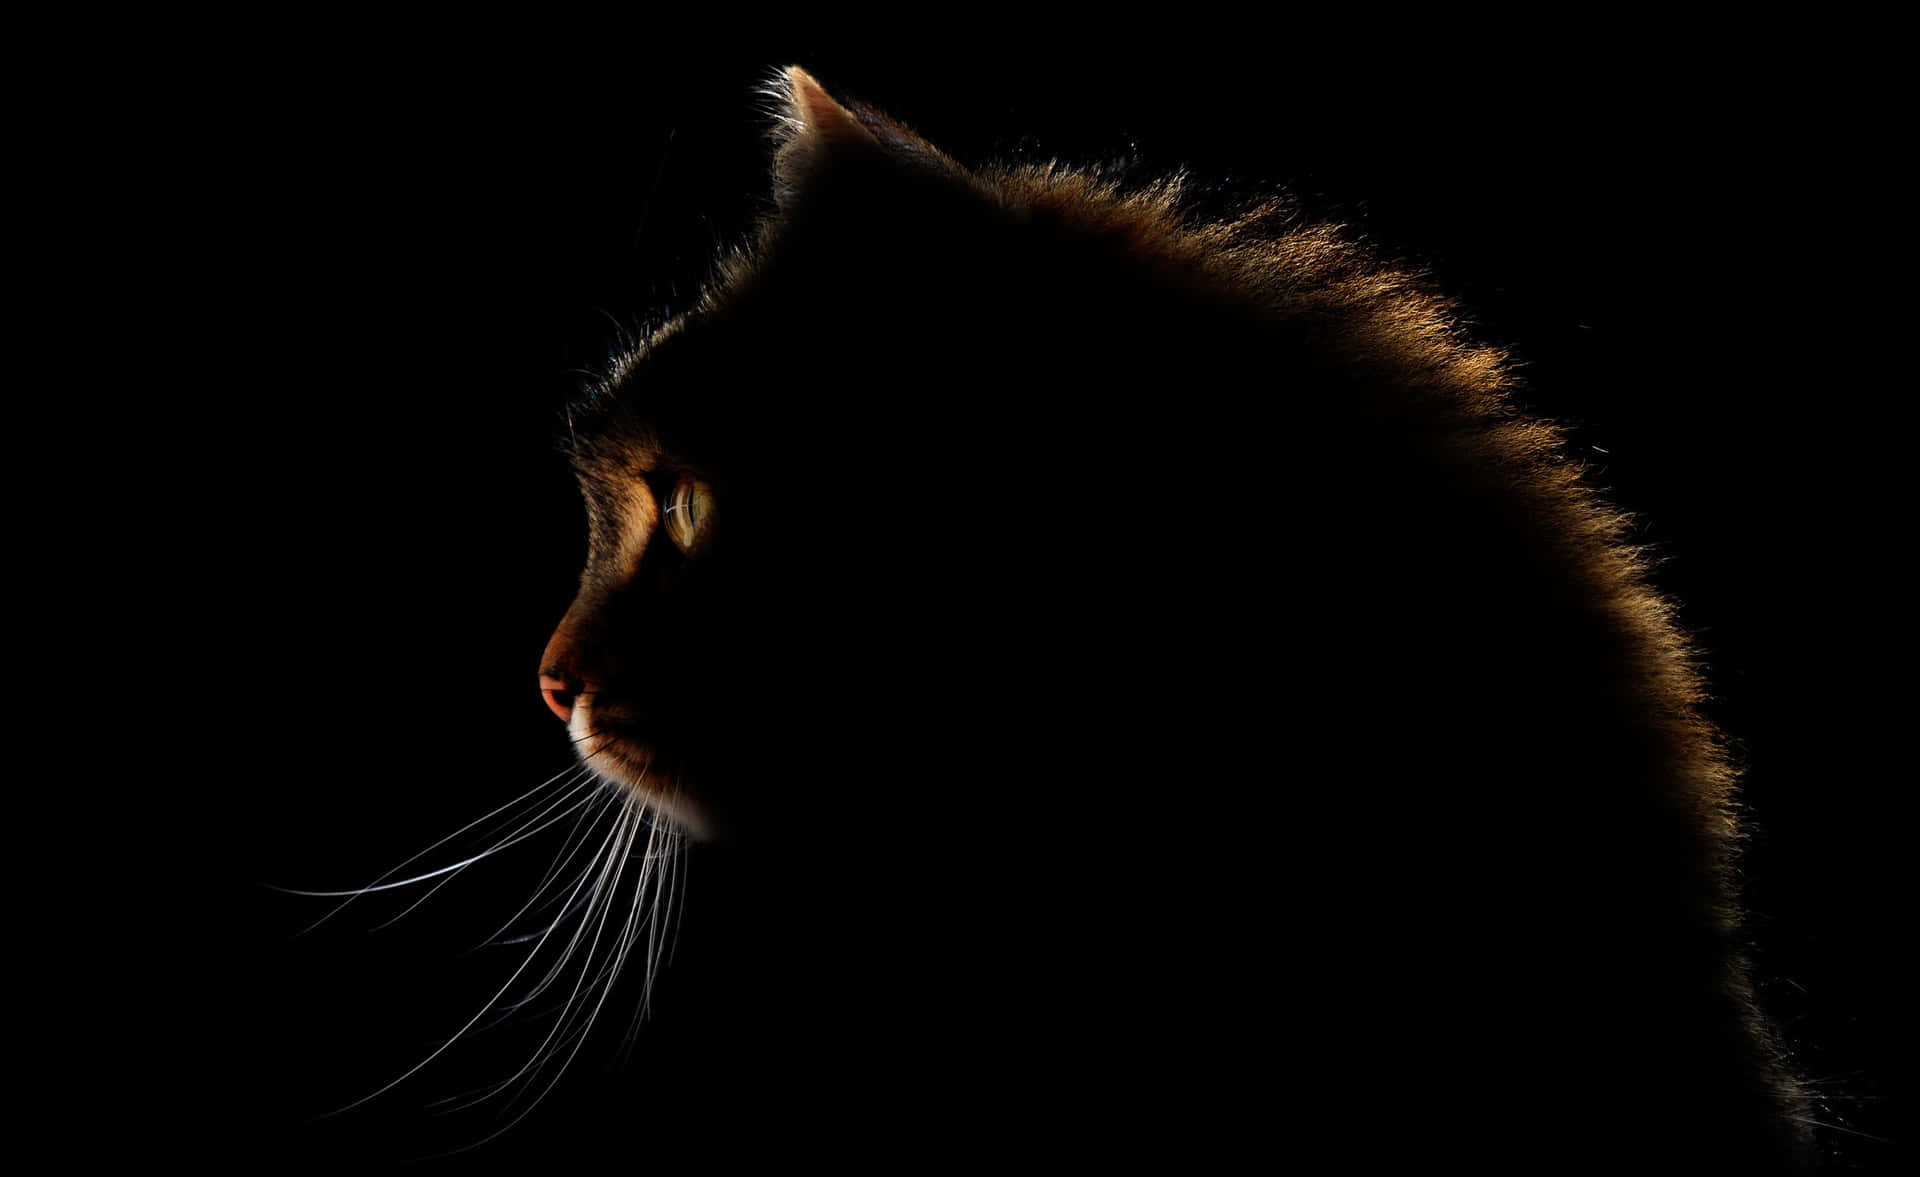 A Cat's Head Silhouetted Against A Black Background